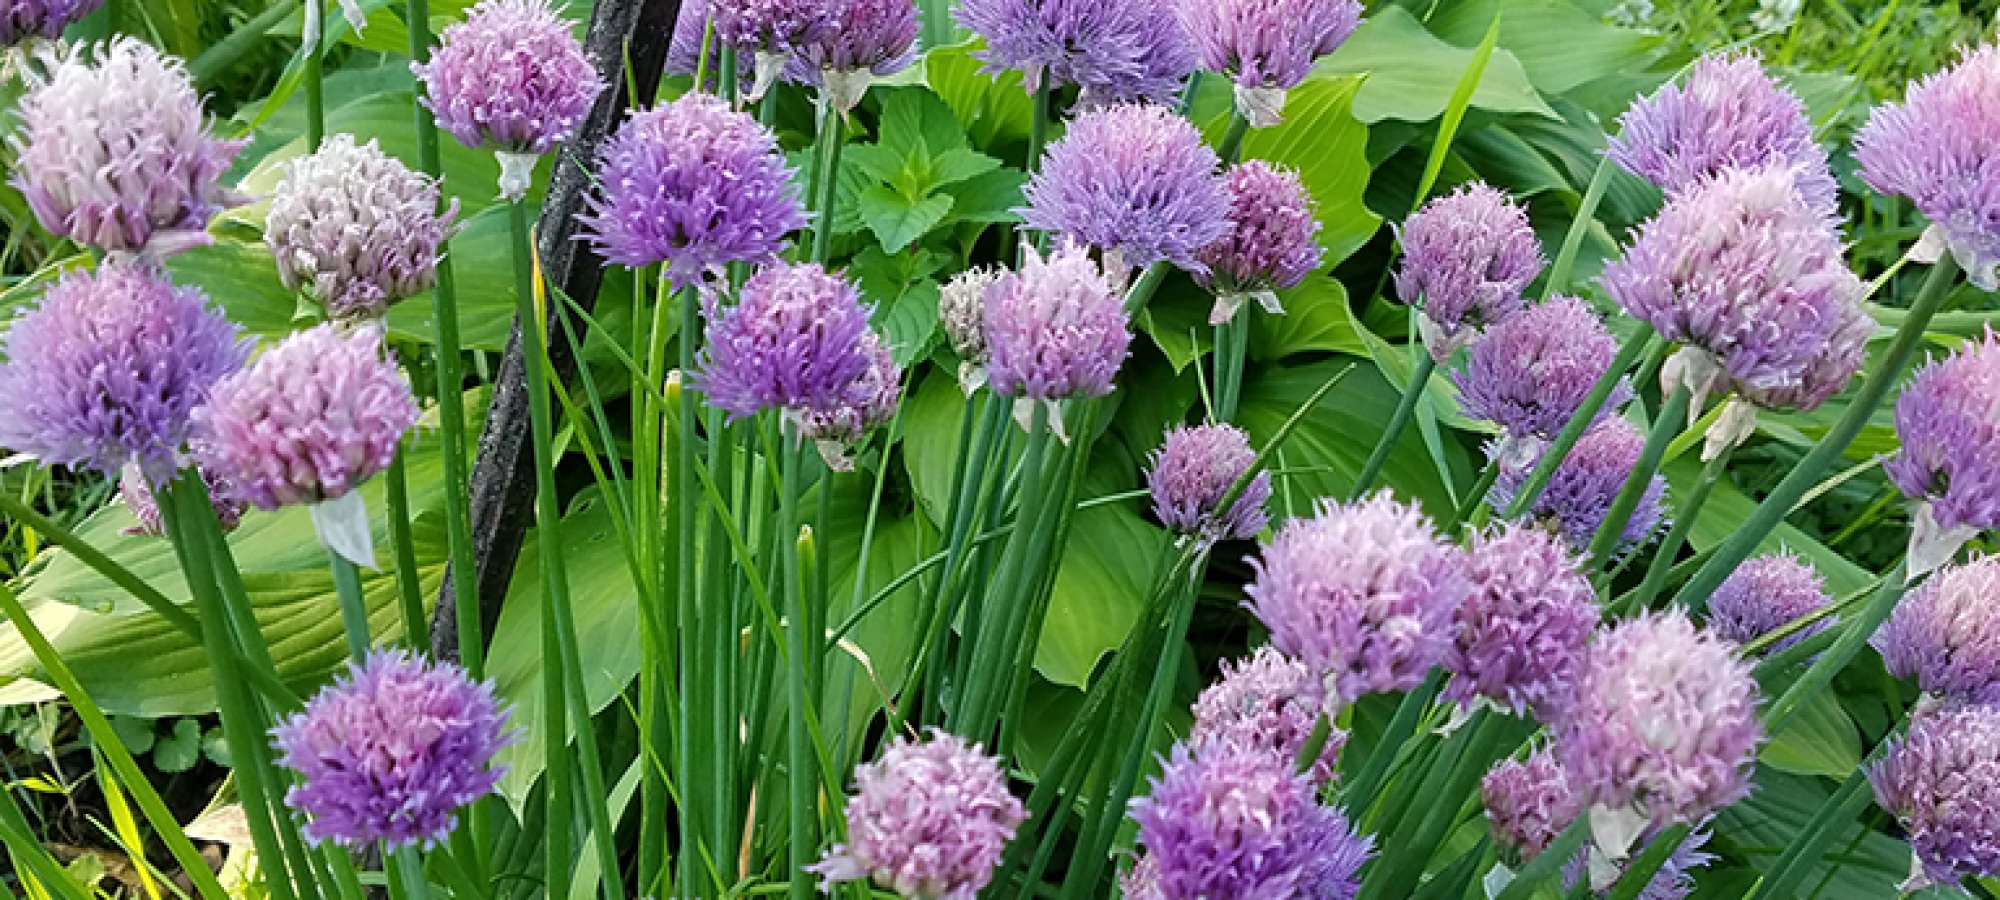 Onion chives